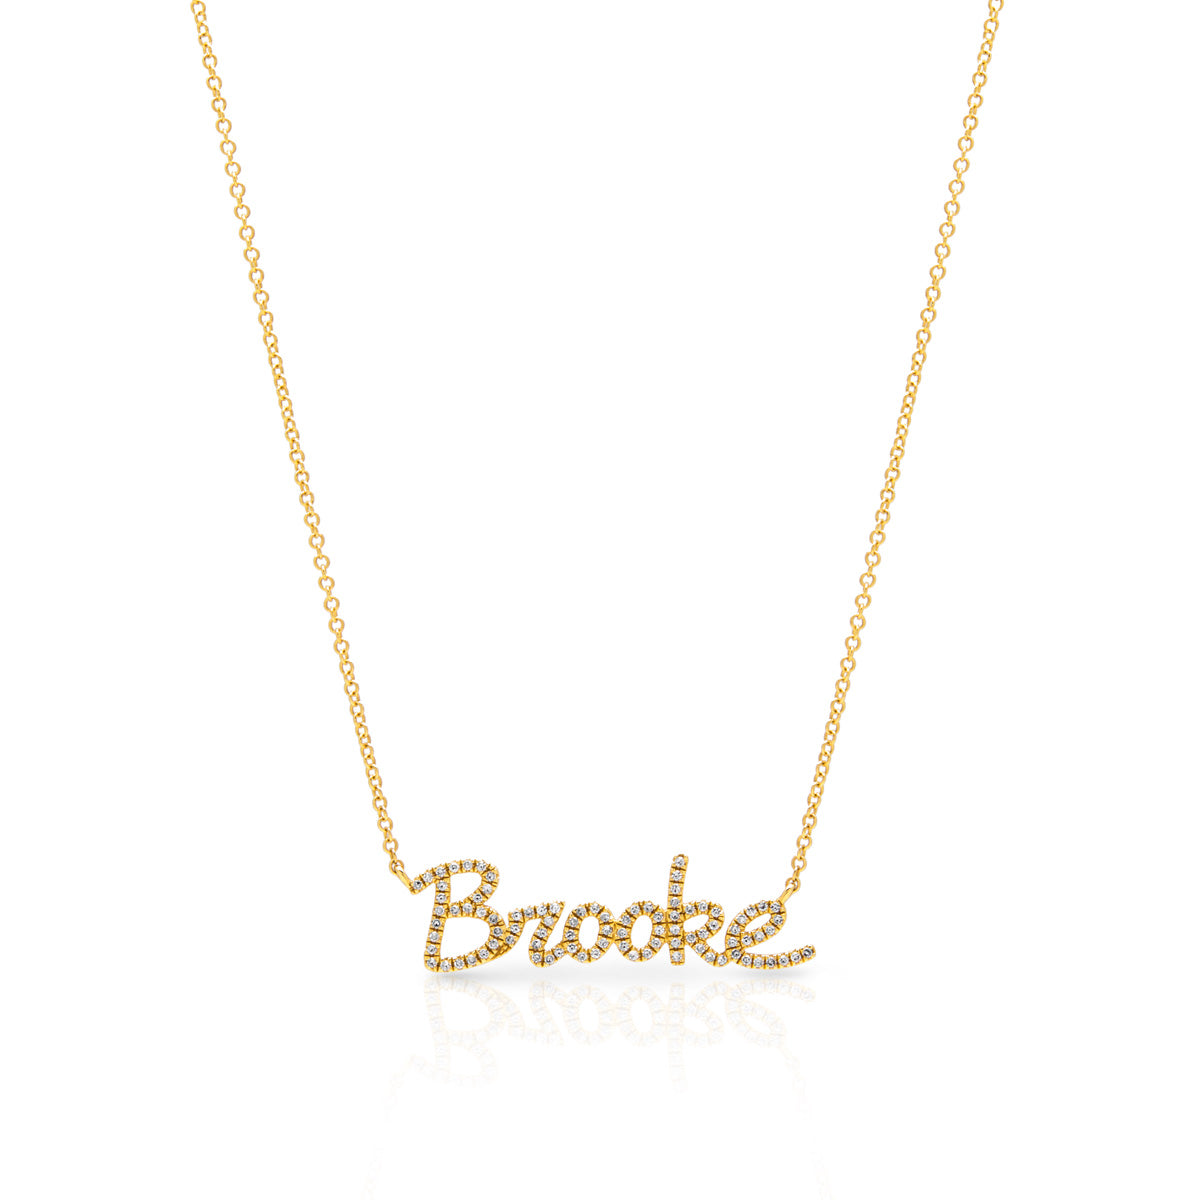 14KT Rose Gold Diamond Personalized Name Necklace